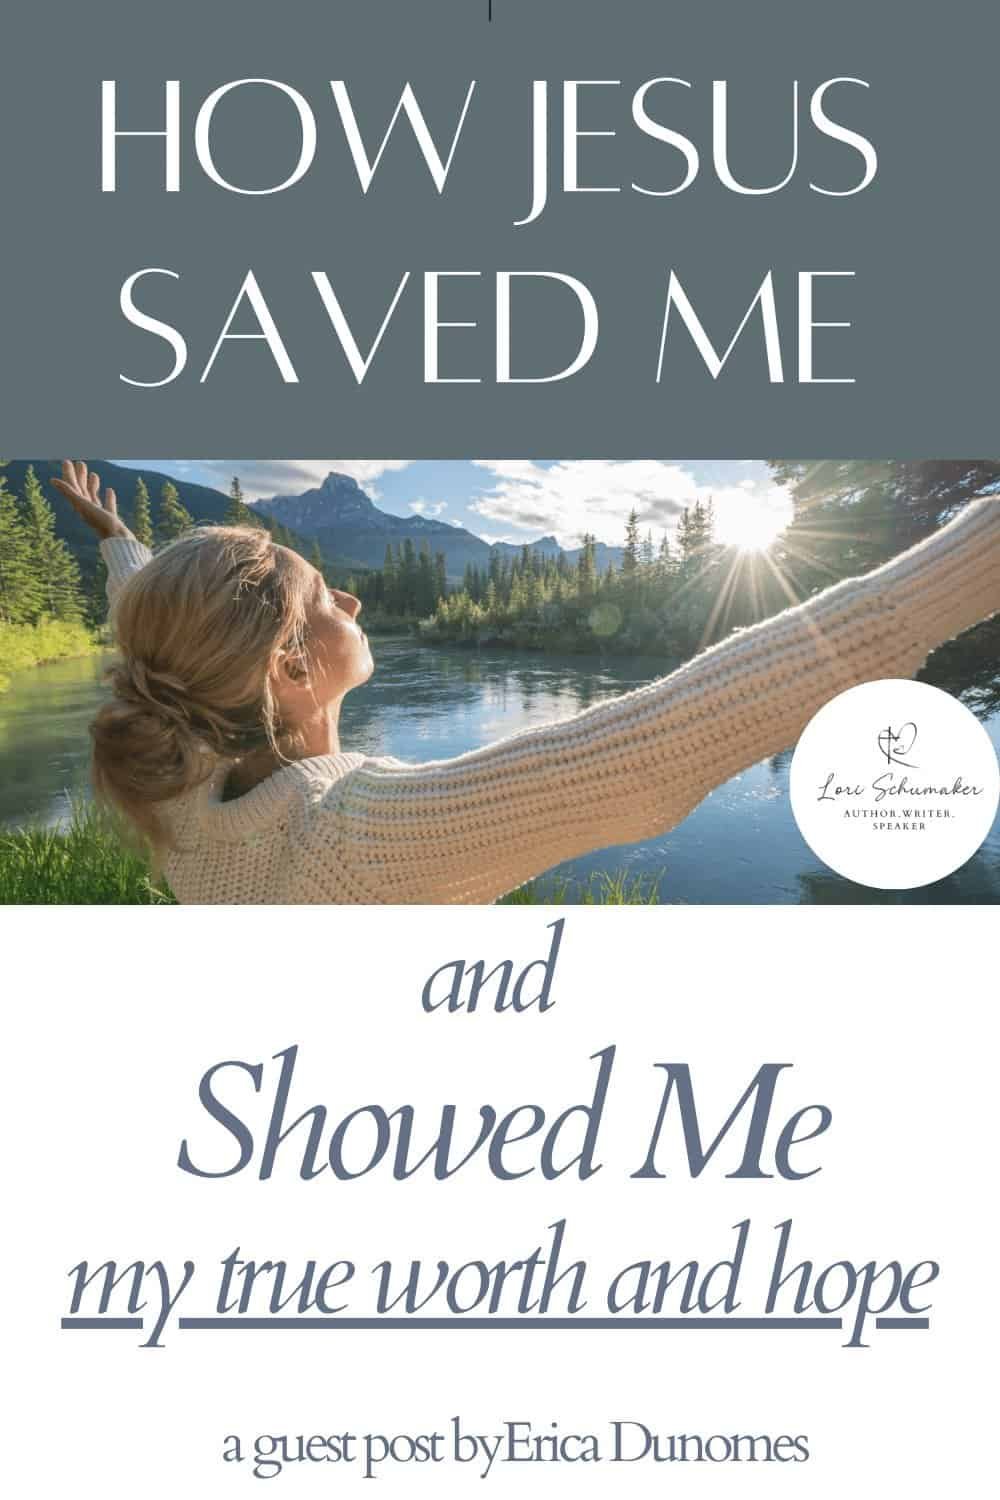 Do you wonder how Jesus can save you and set you free from feelings of worthlessness and hopelessness? Find hope in this powerful story. Join us for the series, "Satan Thought He Had Me: Stories of Redemption That Will Give You Hope" for encouragement and inspiration to believe that you, too, can overcome anything the devil throws your way!